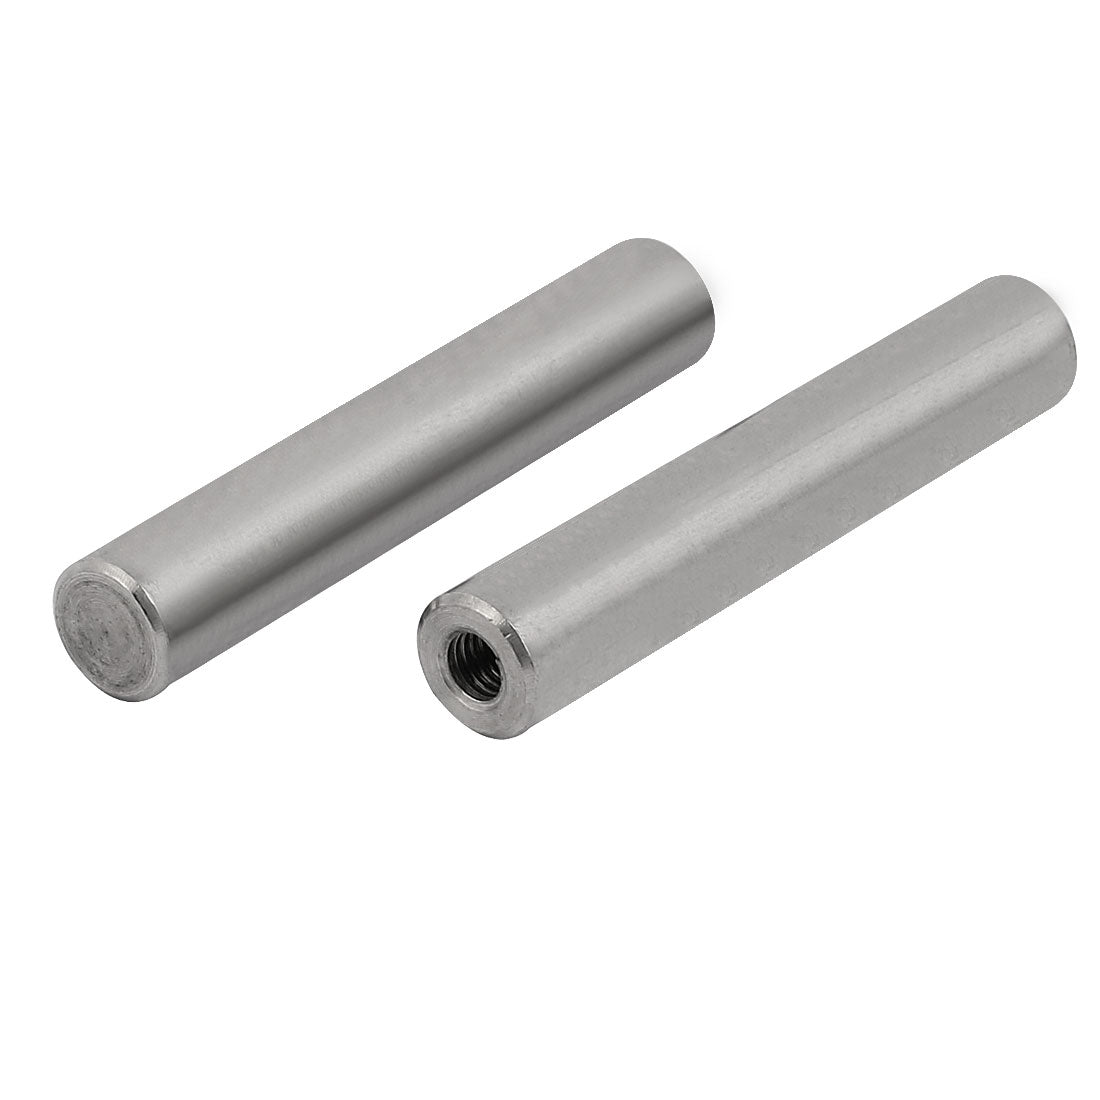 uxcell Uxcell 304 Stainless Steel M6 Female Thread 12mm x 70mm Cylindrical Dowel Pin 2pcs